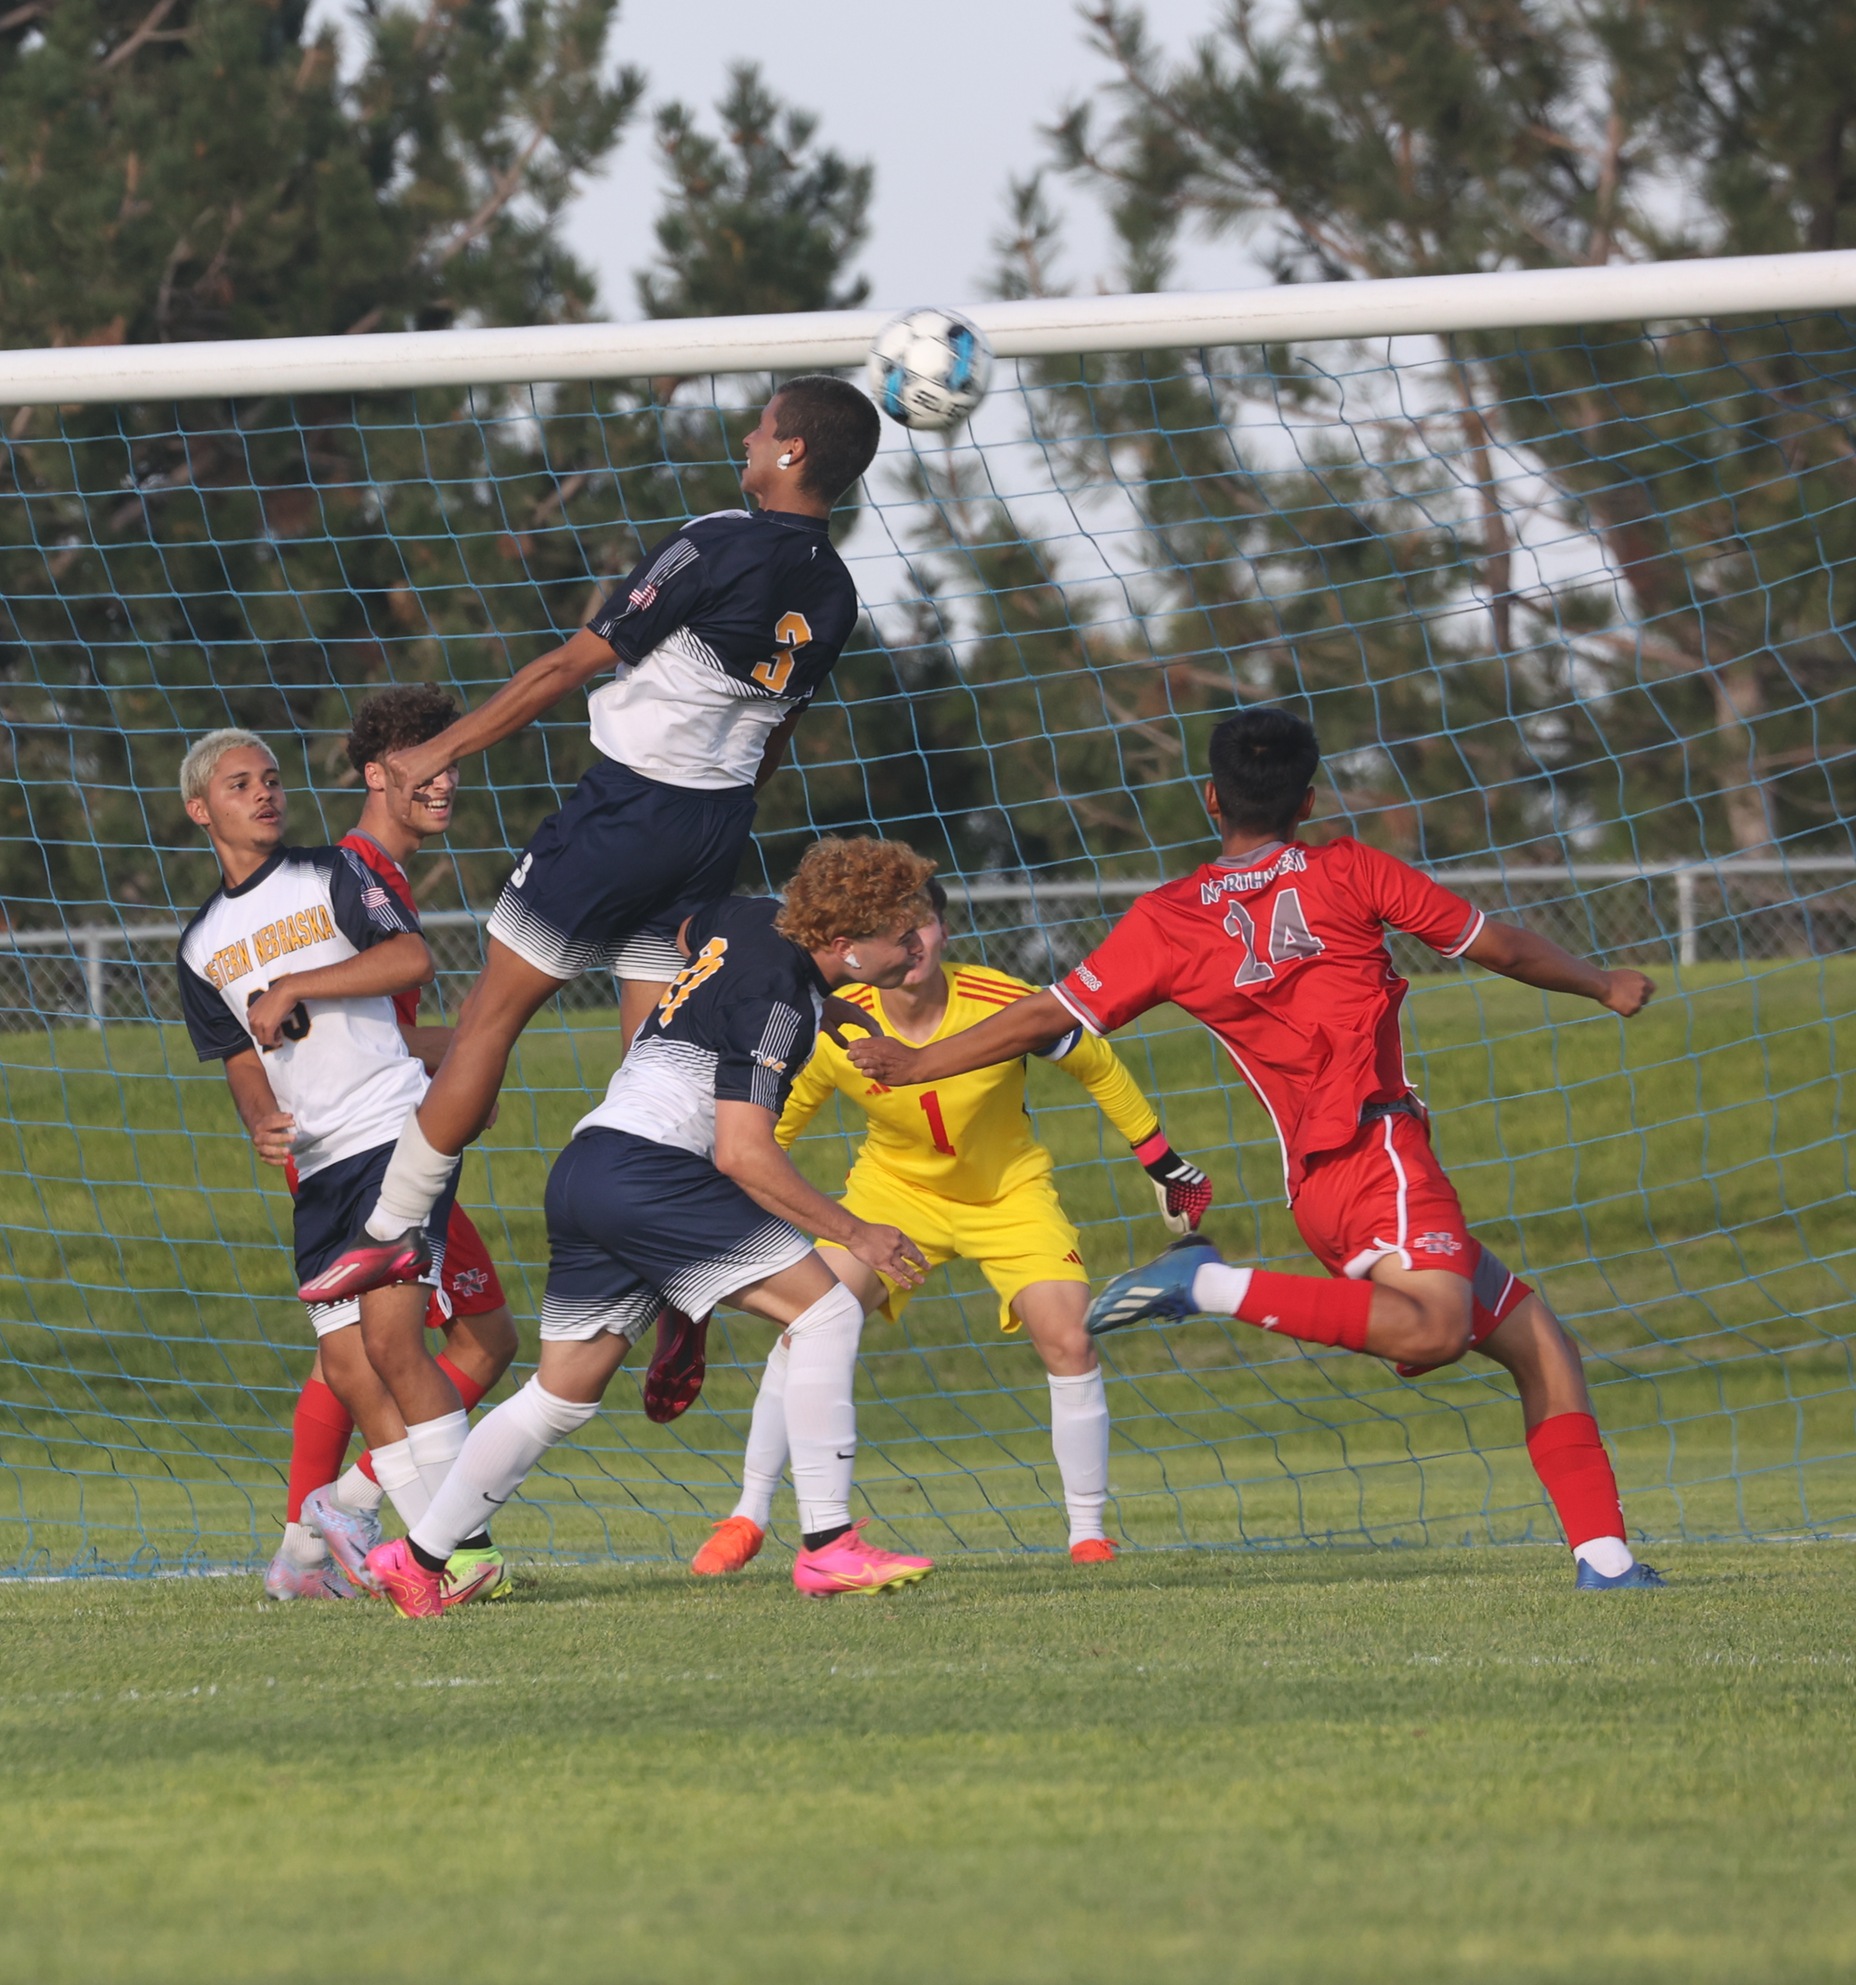 WNCC scores on a header goal in the first half.